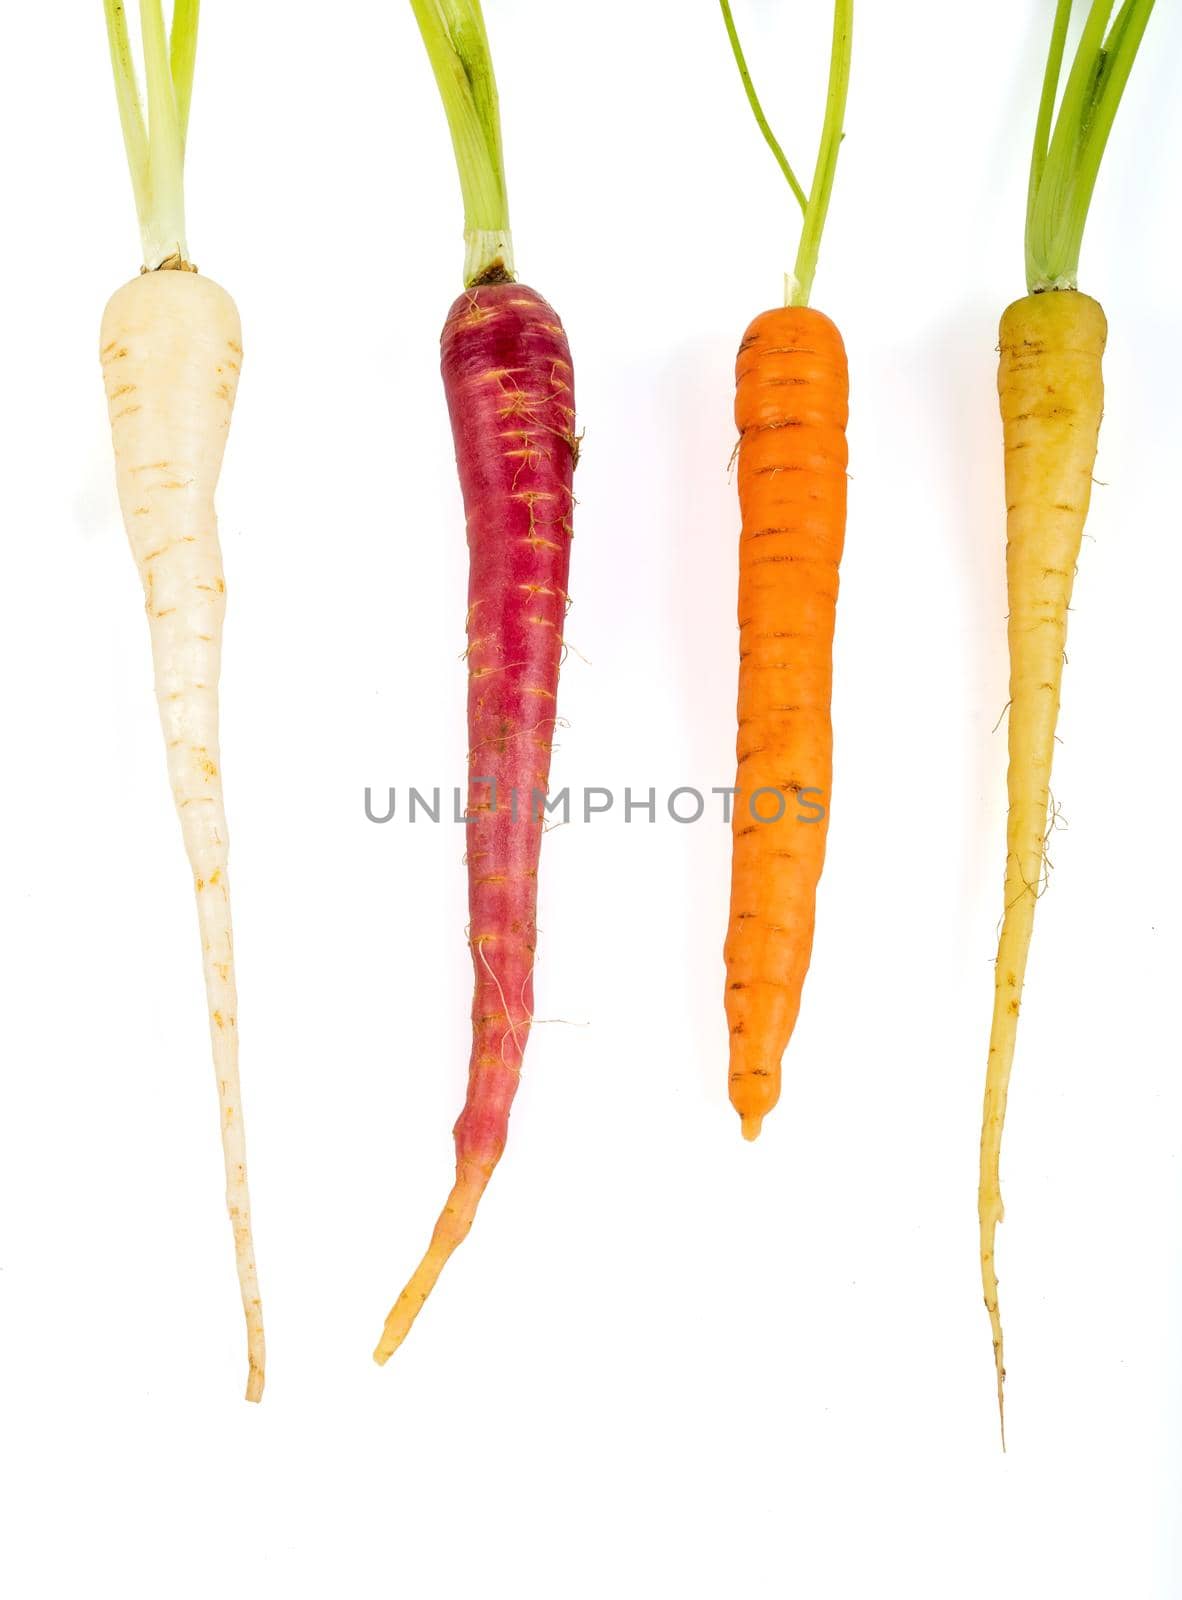 Bunch of fresh baby carrots isolated on white background by Sonat